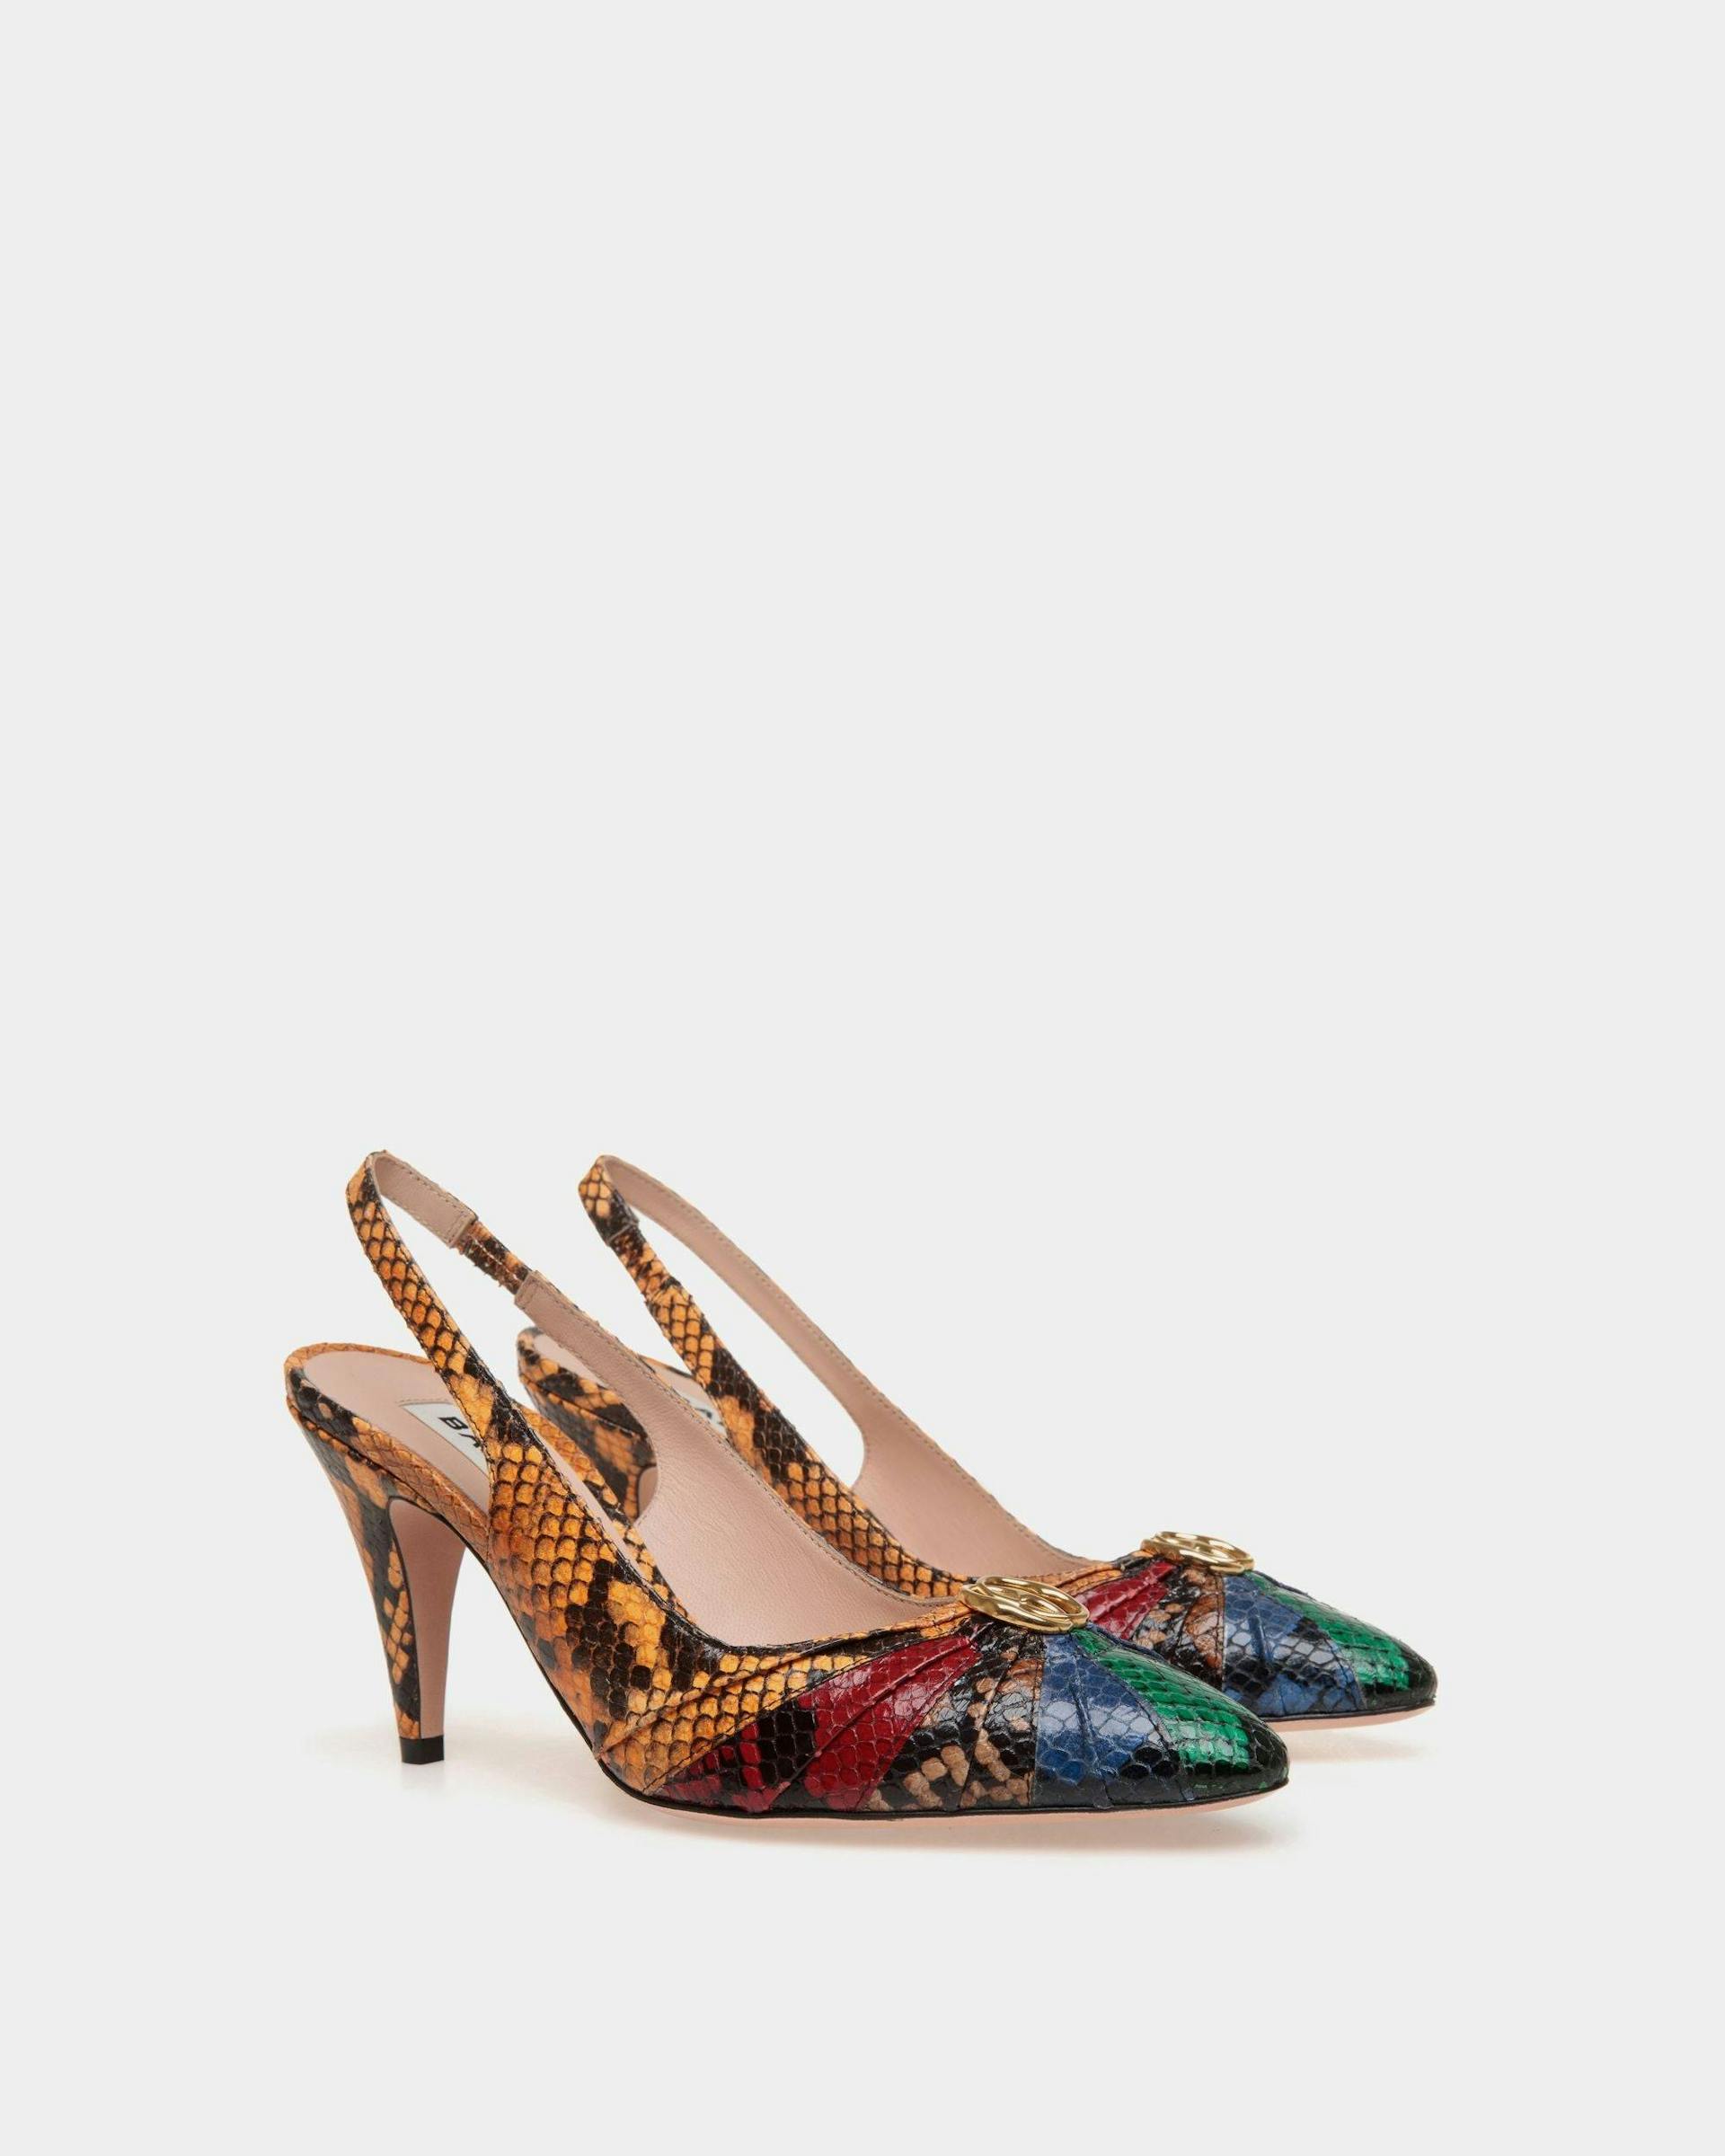 Women's Jolene Slingback Pump in Multicolor Python Printed Leather | Bally | Still Life 3/4 Front